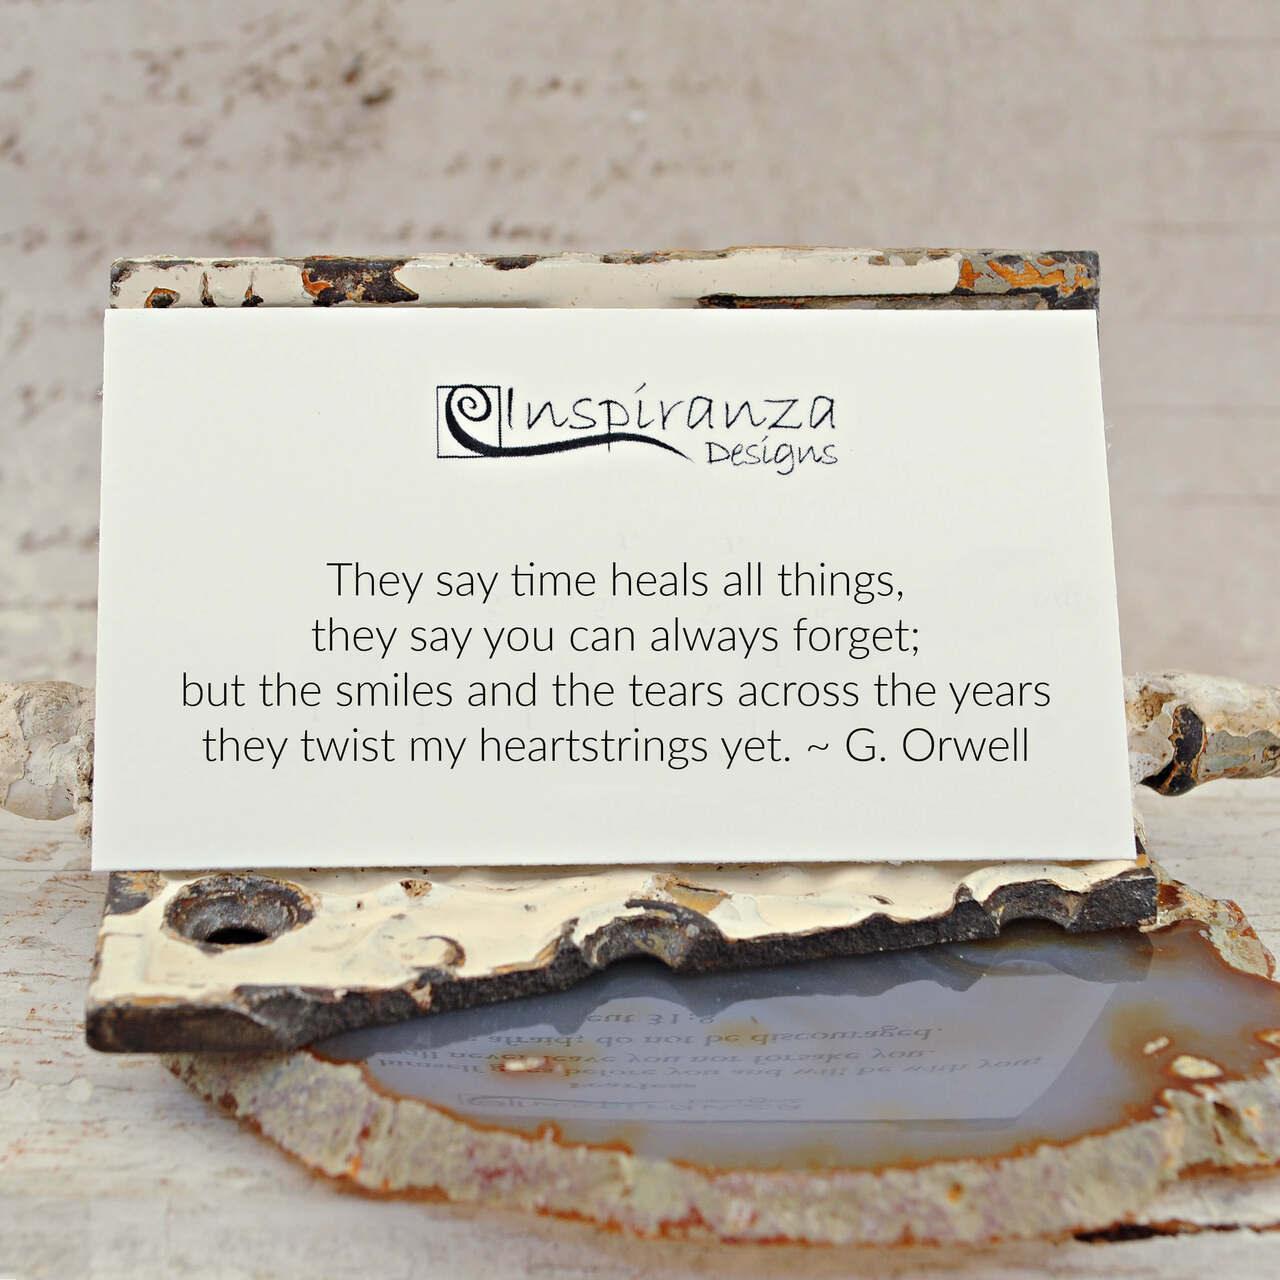 Includes inspirational message card ~ They say time heals all things, they say you can always forget; but the smiles and the tears across the years they twist my heartstrings yet. ~ G. Orwell